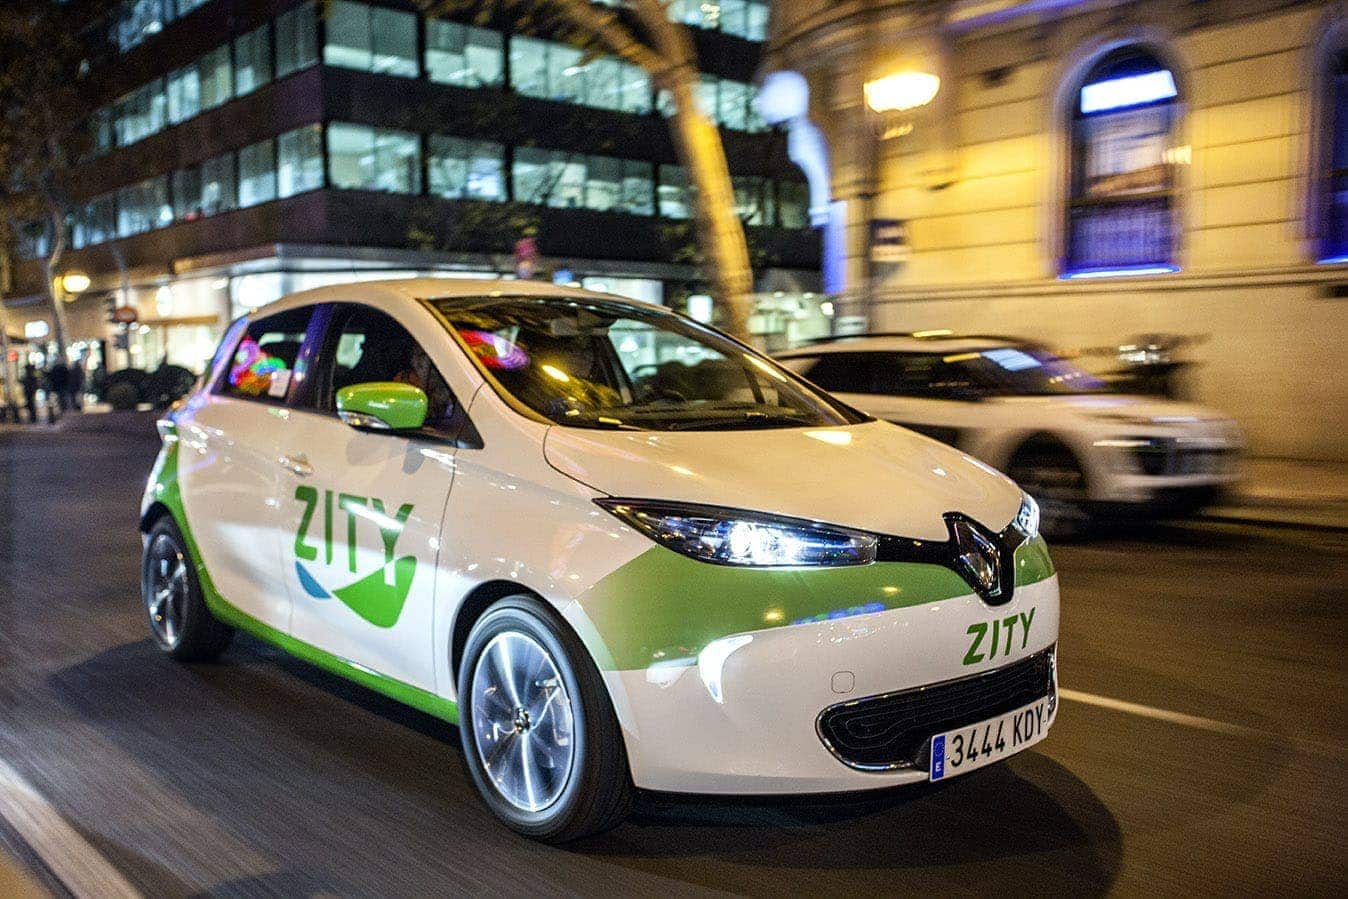 coche carsharing zity, ferrovial y renault